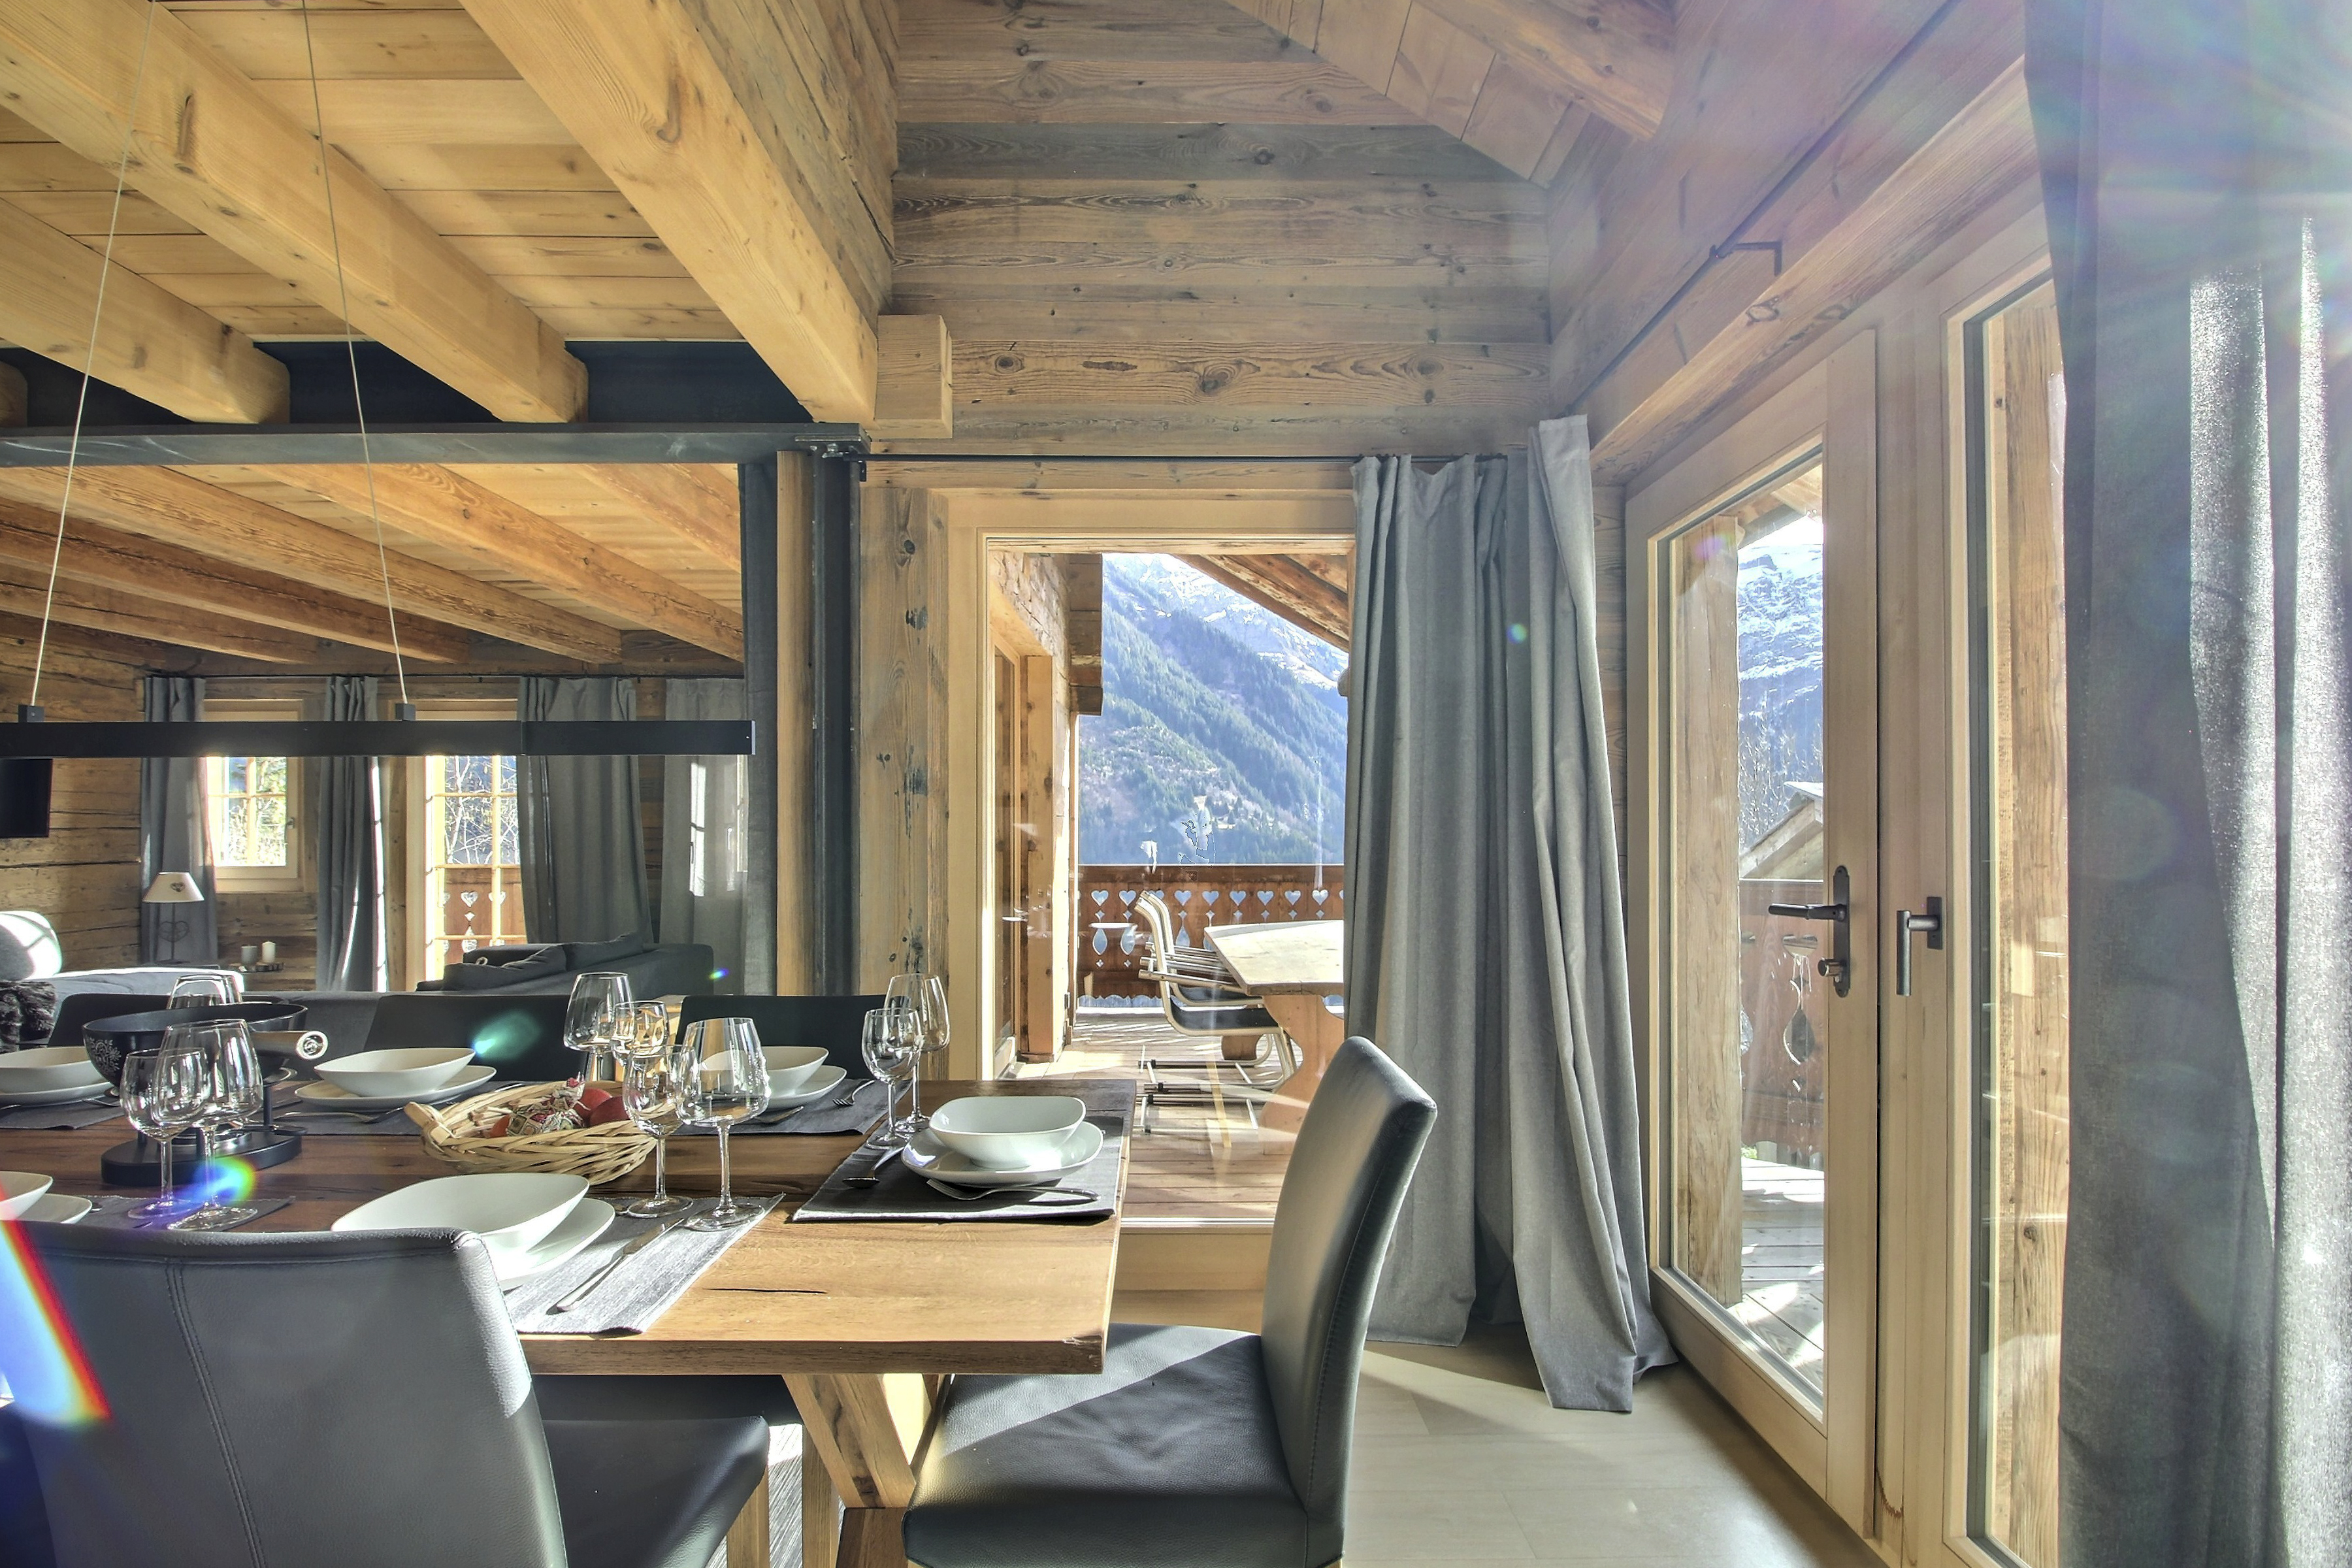 Authentic renovated chalet in the wild